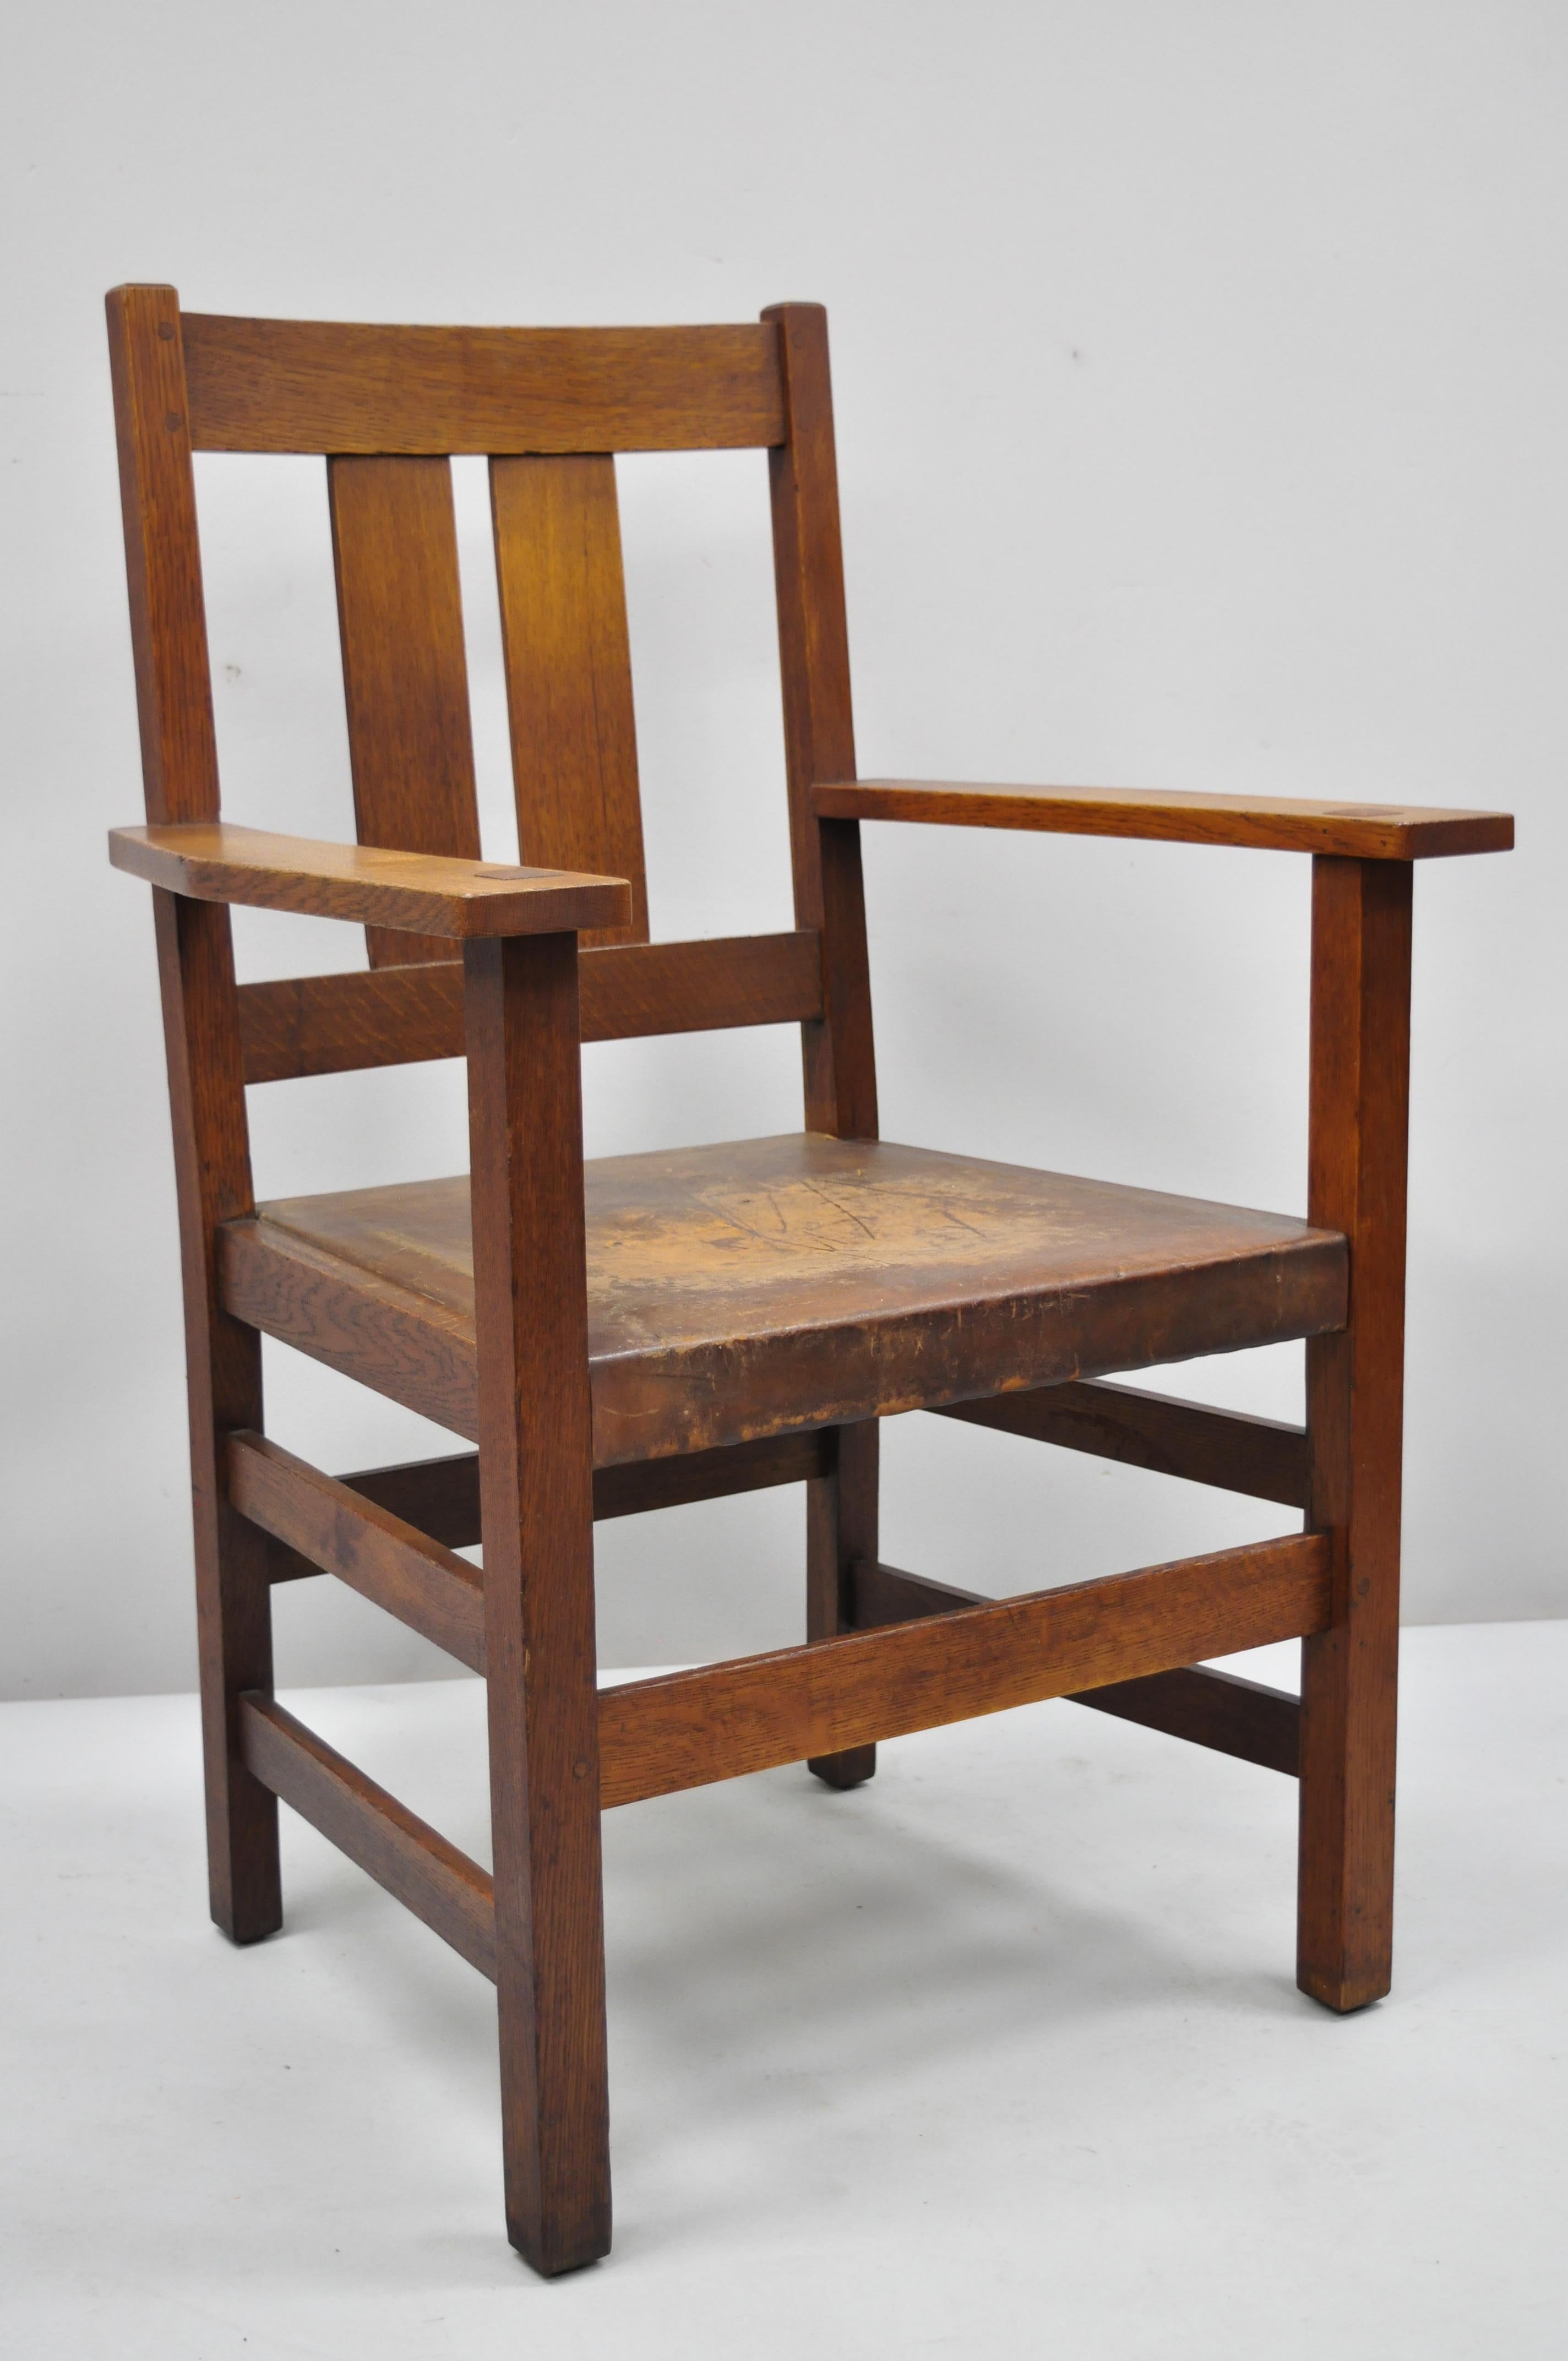 L & J.G. Stickley Oak Mission Arts & Crafts Dining armchair leather seat. Item features solid wood construction, beautiful woodgrain, leather upholstery, original label, very nice antique item, quality American craftsmanship. Early 1900s.